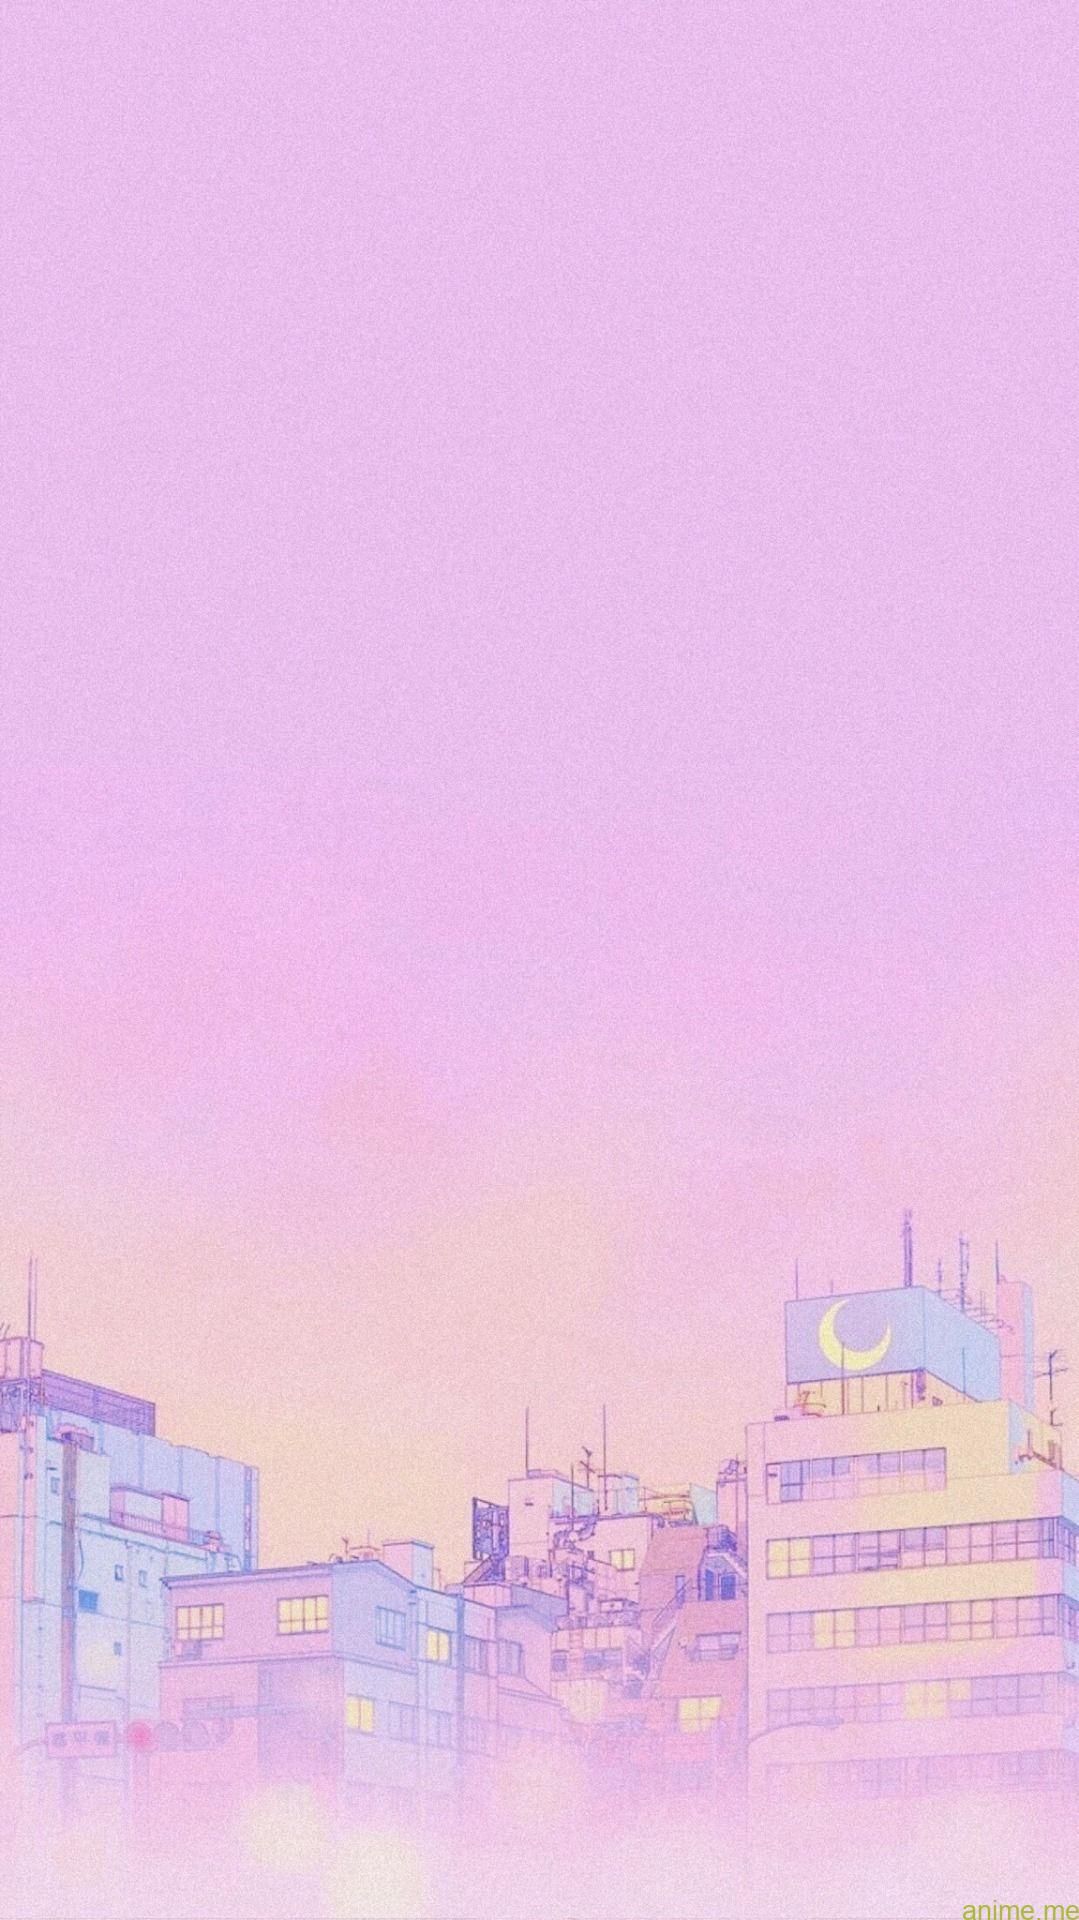 Anime Aesthetic Wallpapers Iphone _ Anime Aesthetic Wallpapers